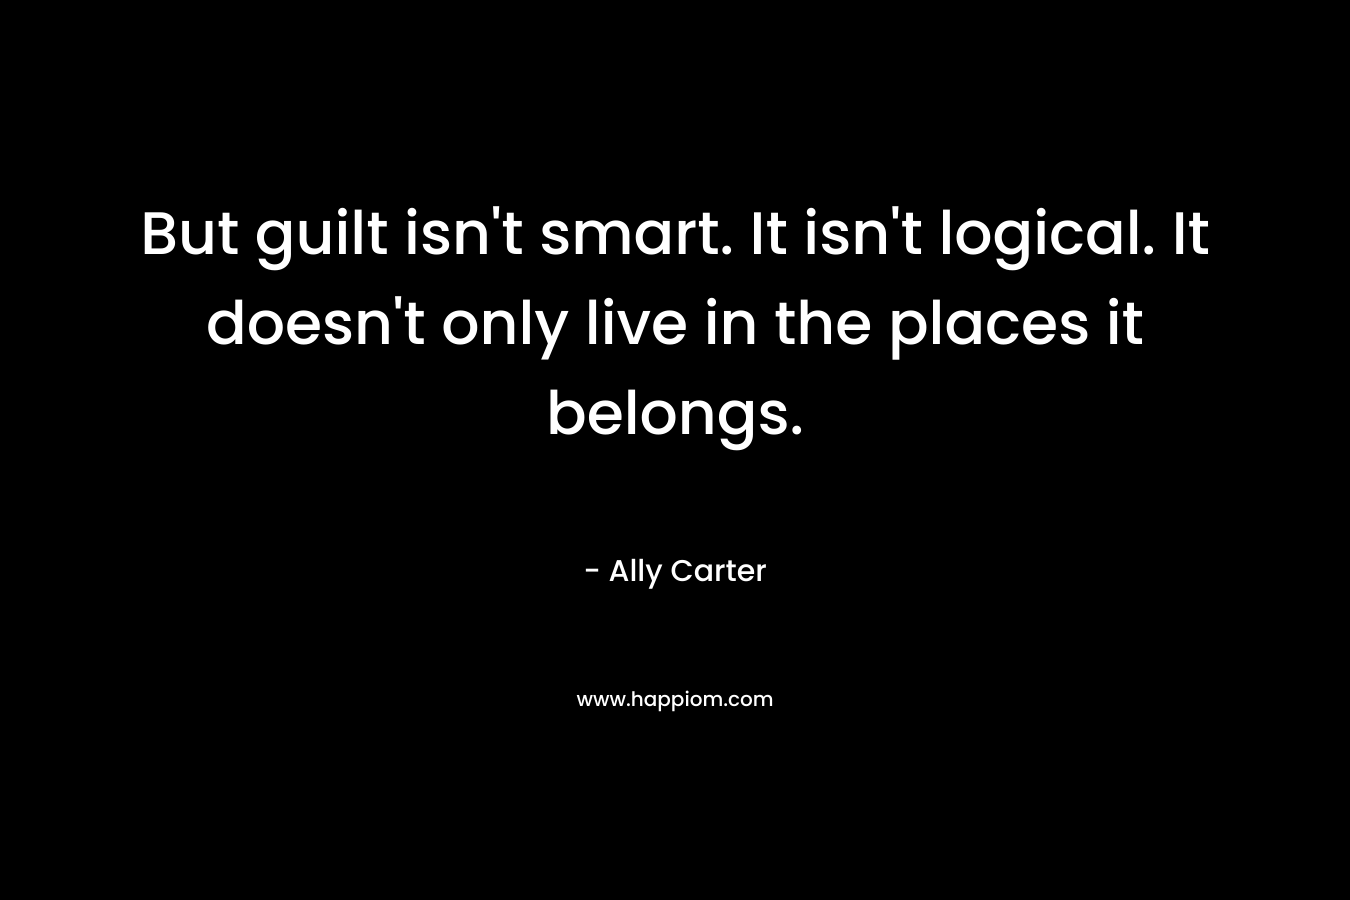 But guilt isn’t smart. It isn’t logical. It doesn’t only live in the places it belongs. – Ally Carter